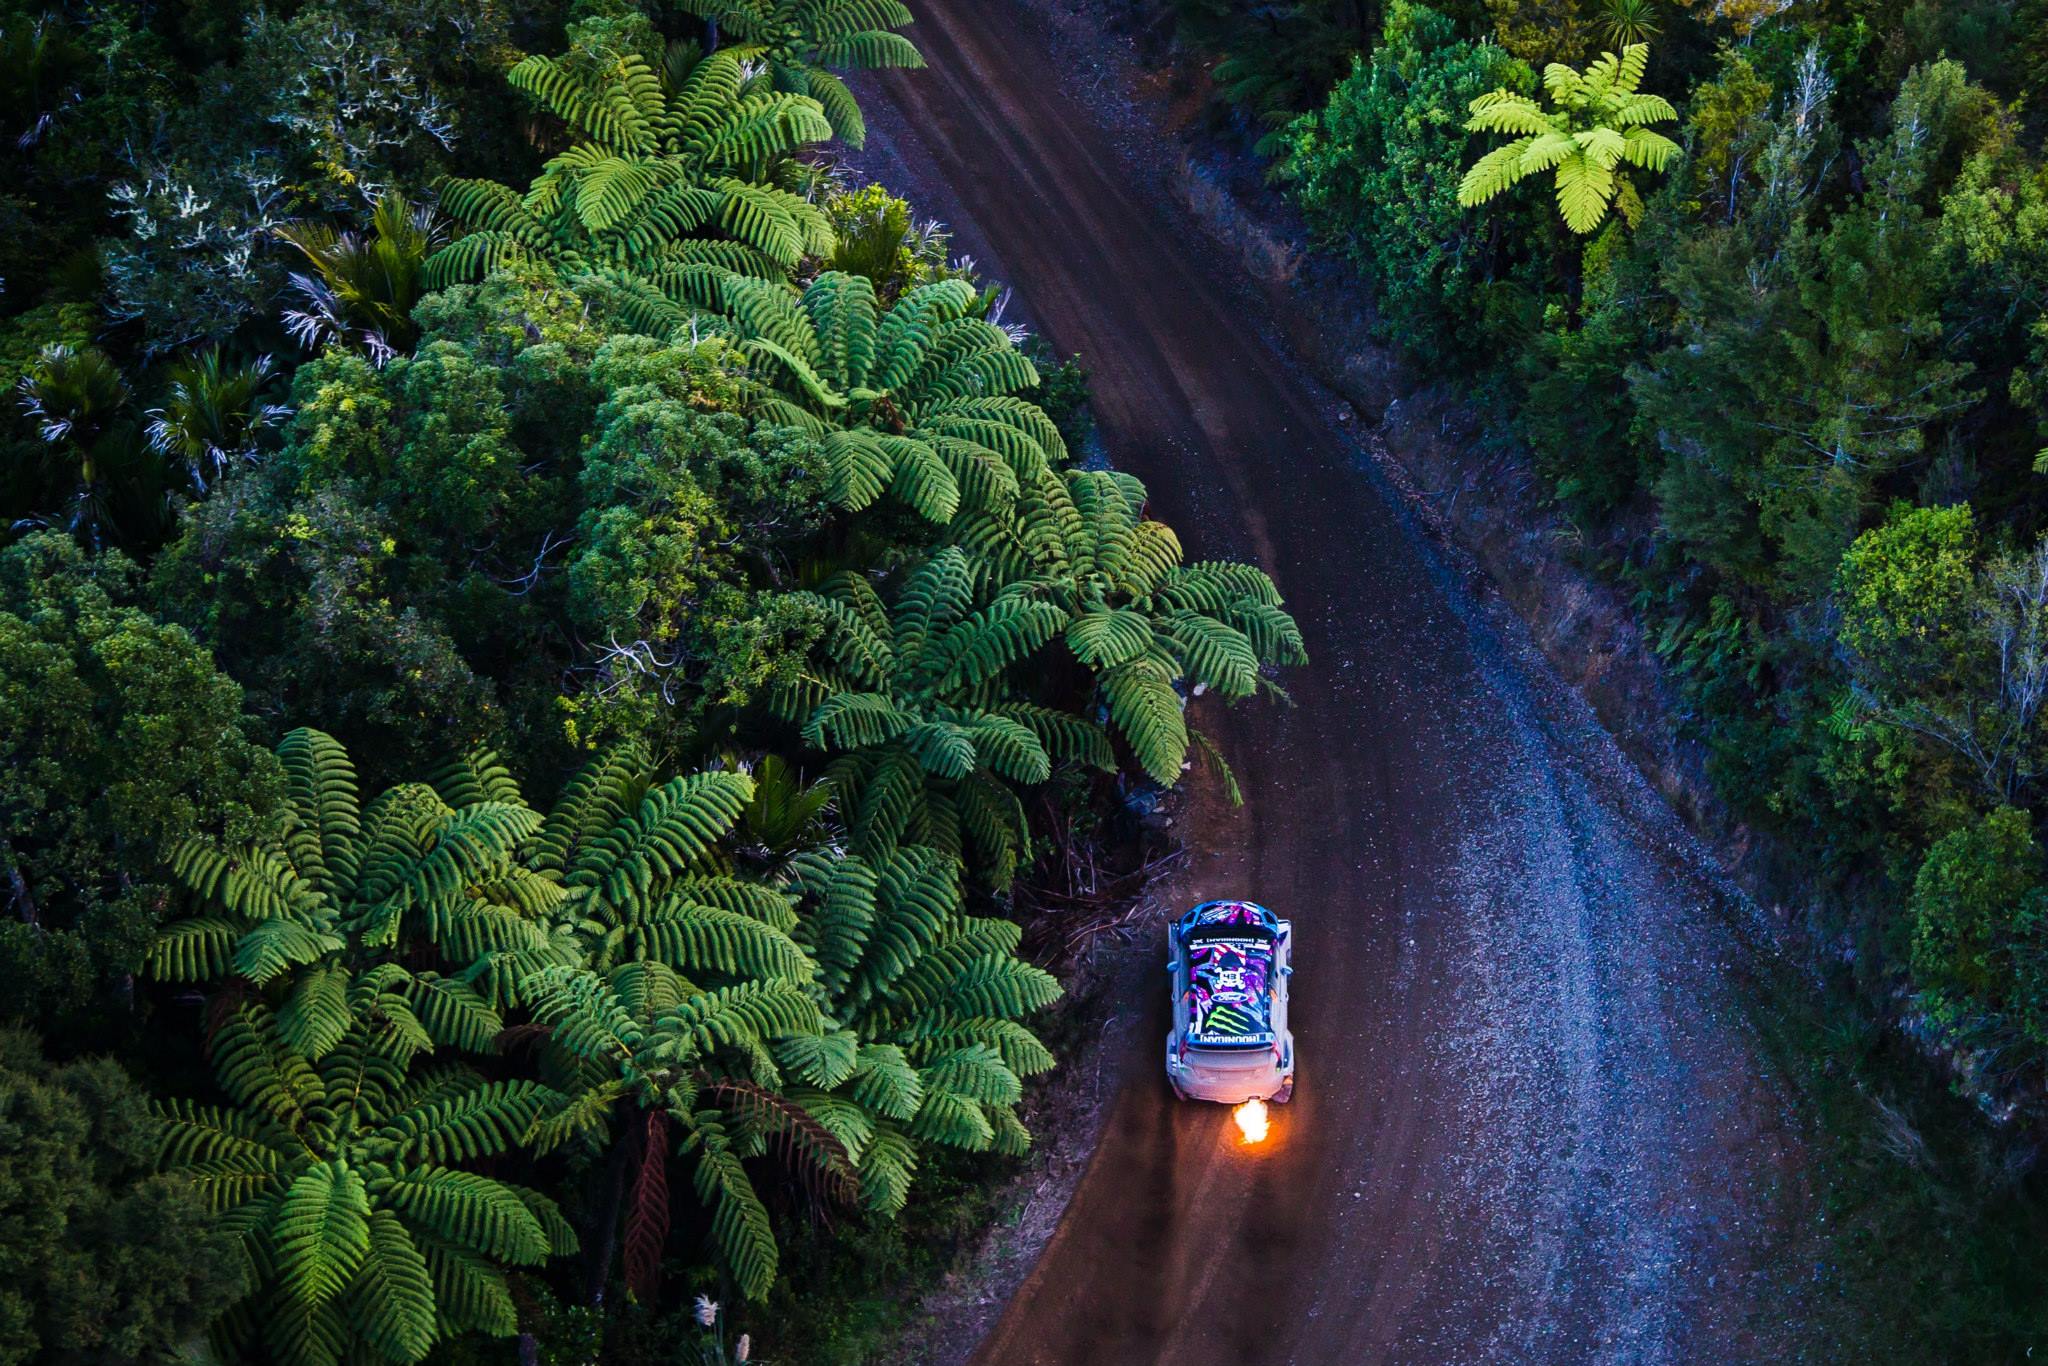 Just ken block doing his usual and making the best wallpaper